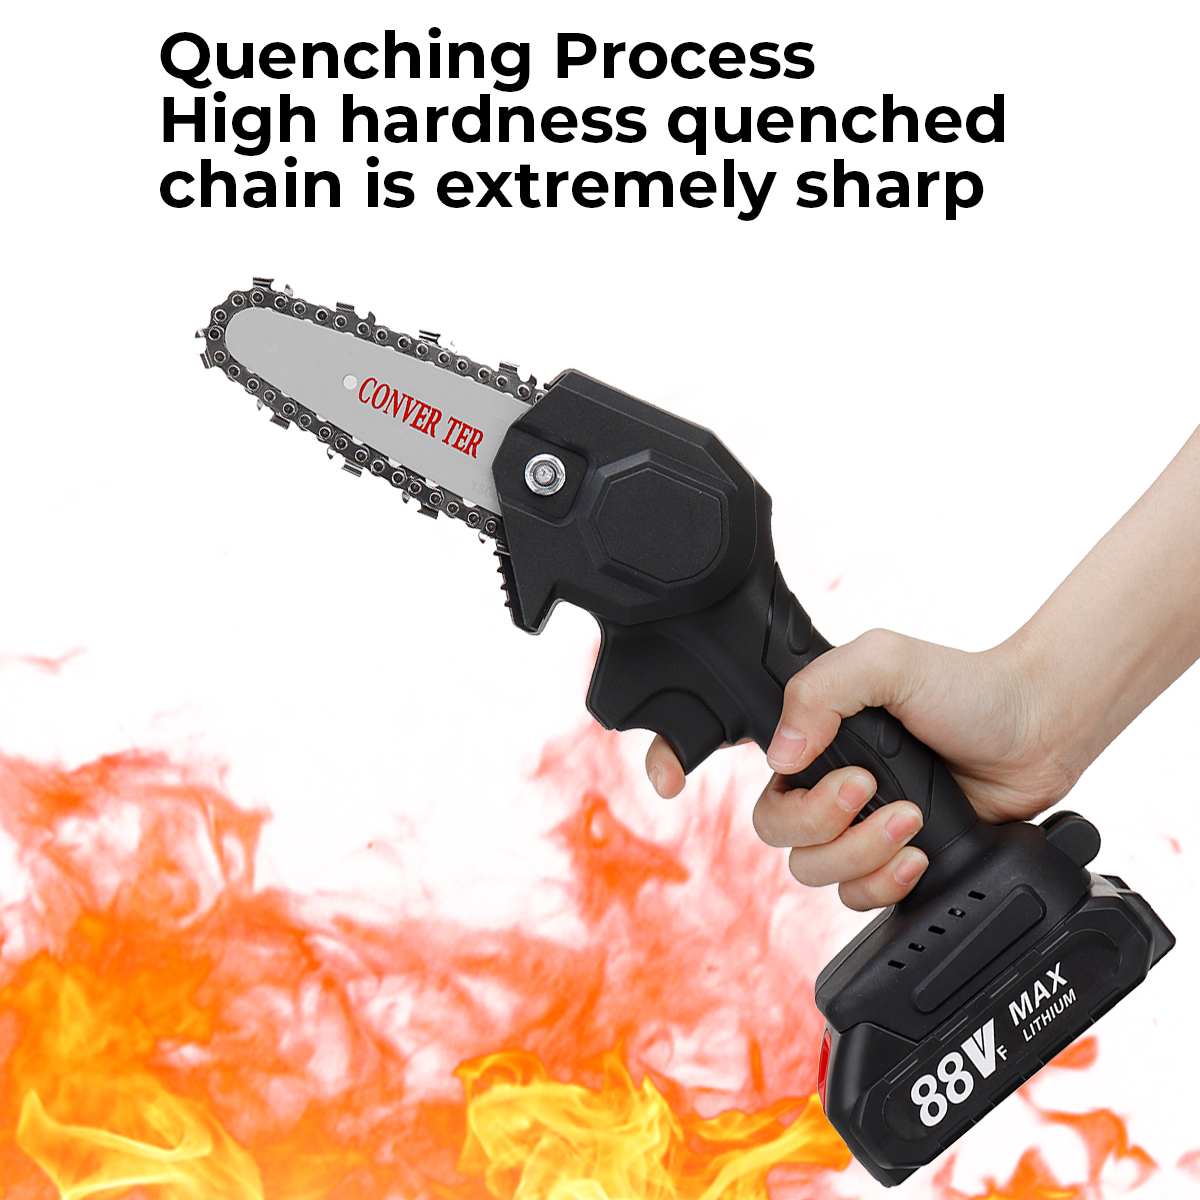 4-Inch-15000mAh-Mini-Electric-Chain-Saw-Pruning-Chainsaw-Cordless-Garden-Tree-Logging-Trimming-Saw-F-1799643-3